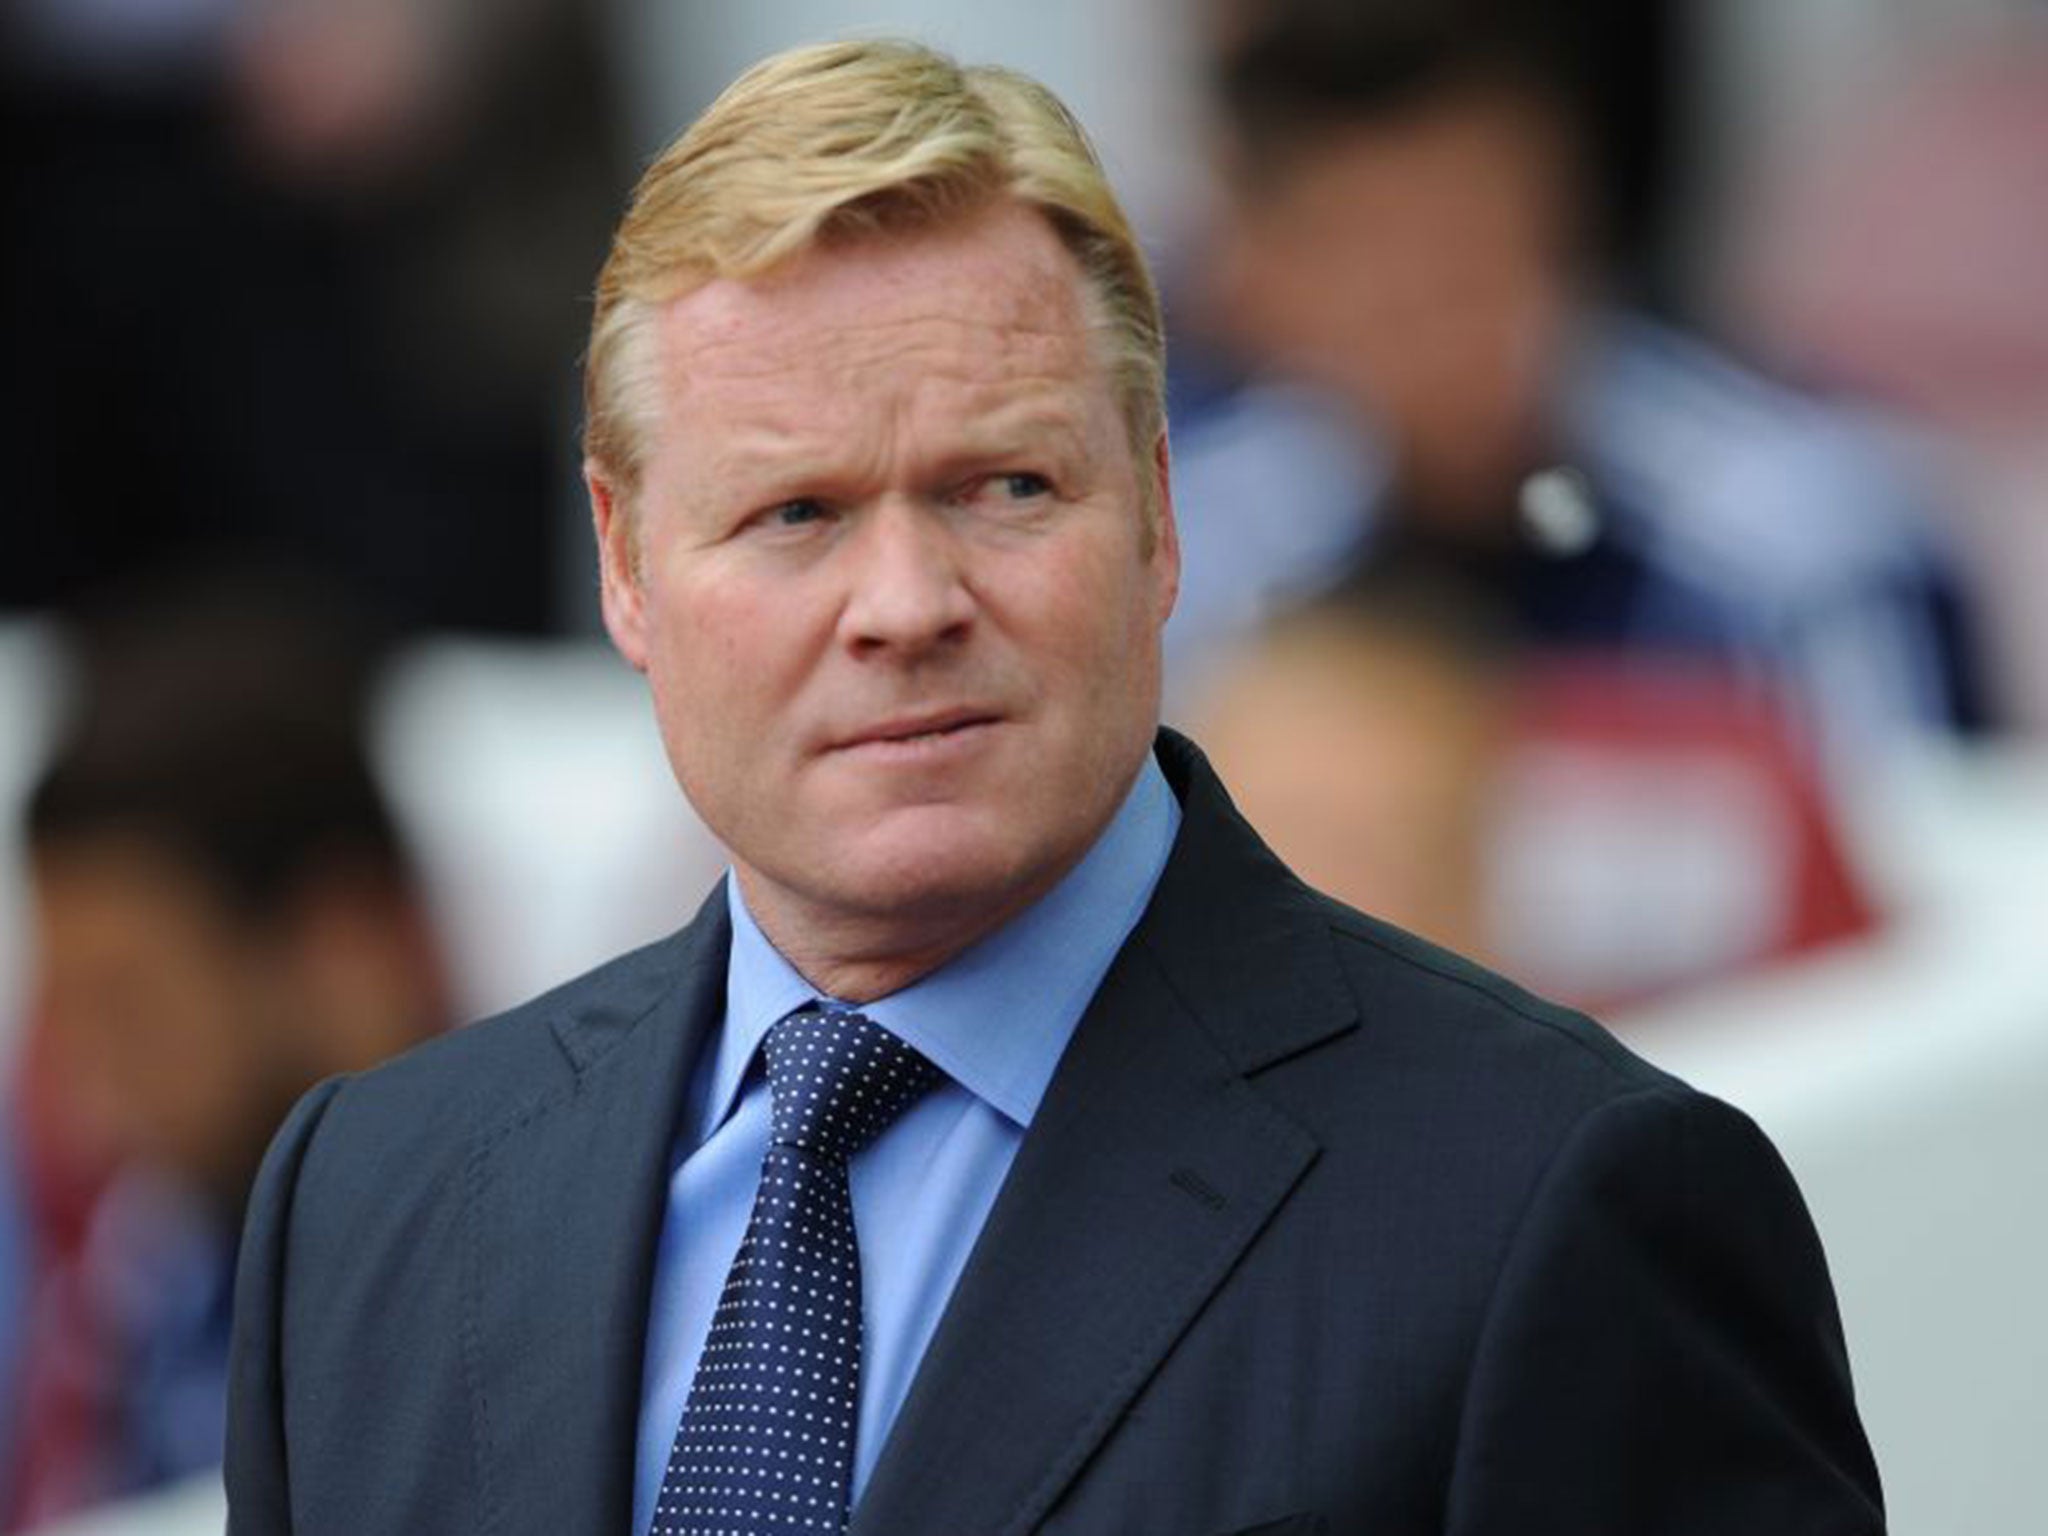 Ronald Koeman has enjoyed a prosperous week with victories over Millwall and West Ham